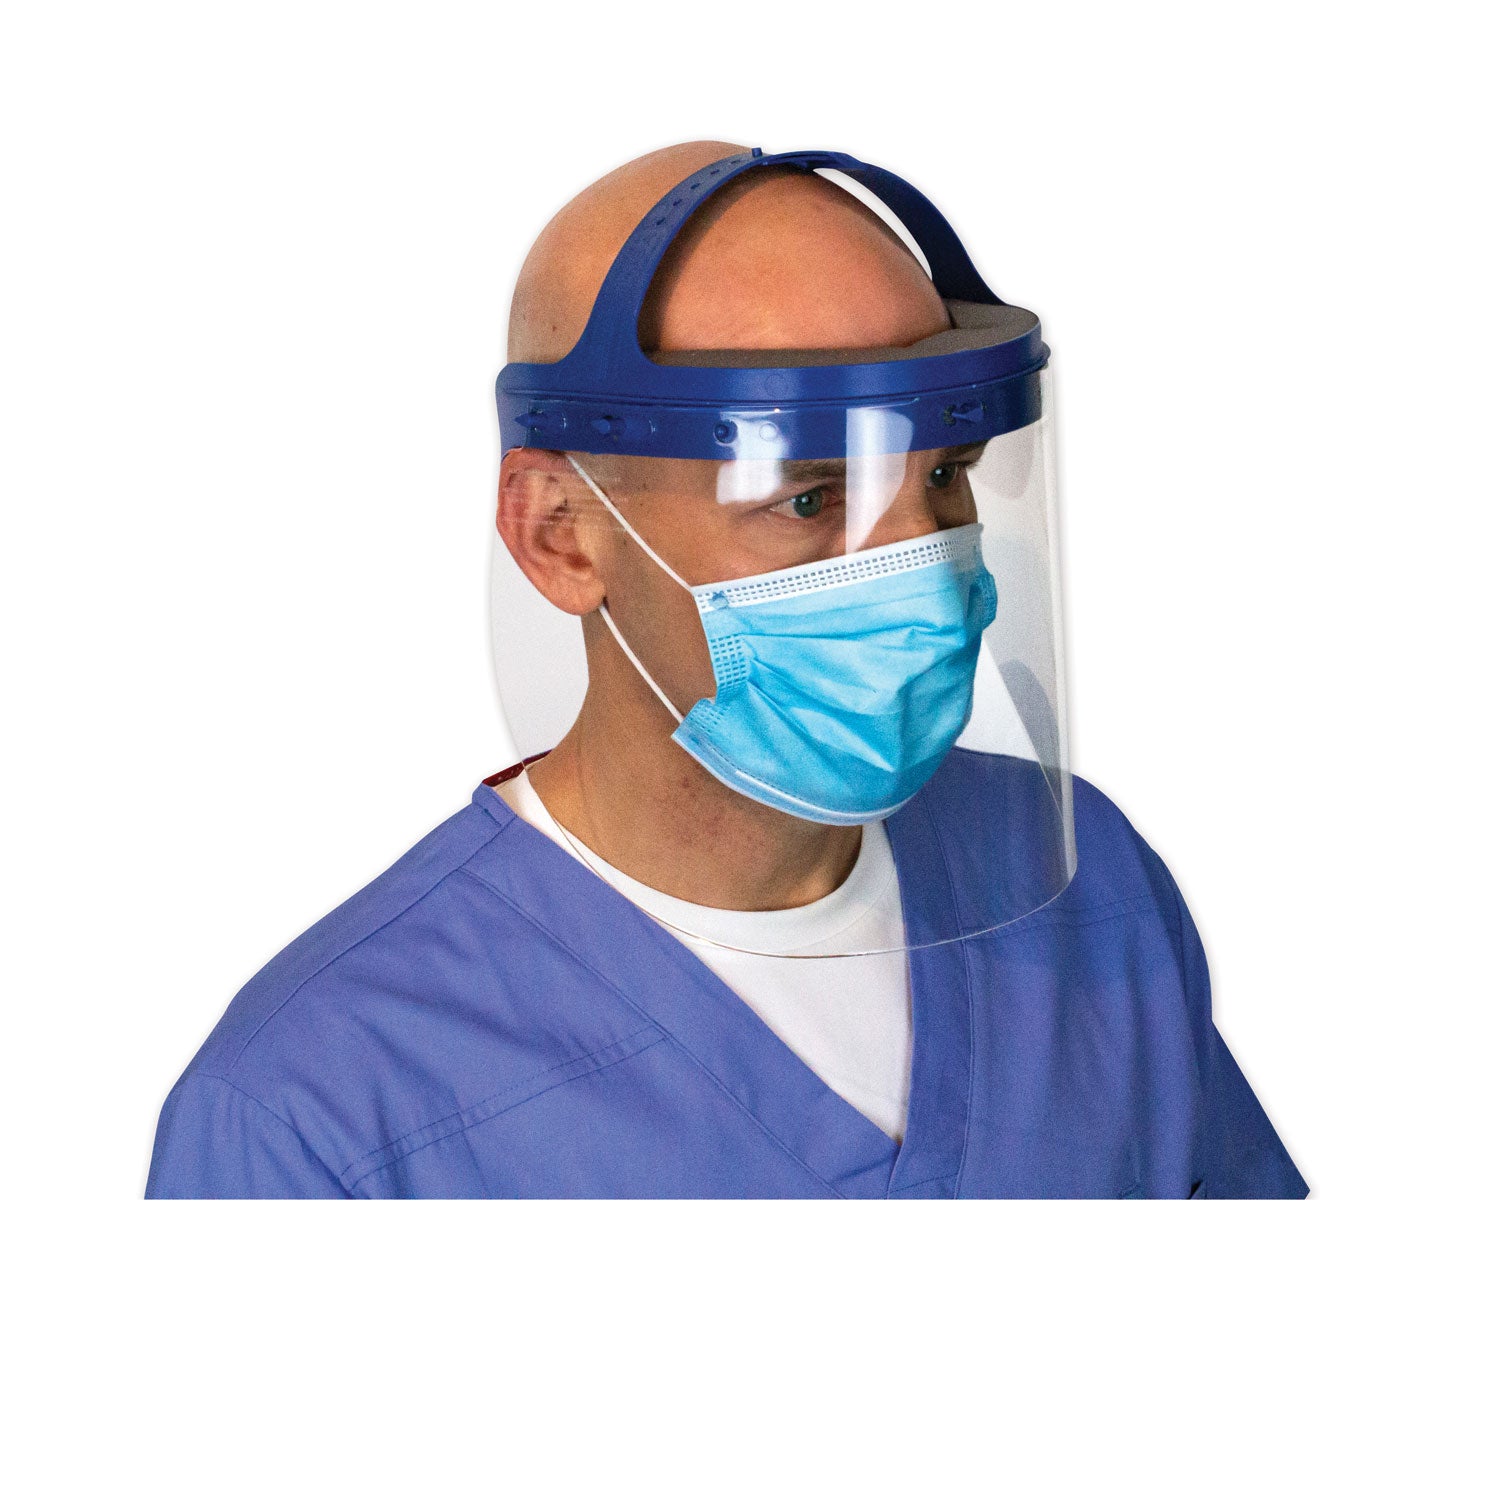 fully-assembled-full-length-face-shield-with-head-gear-165-x-1025-x-11-clear-blue-16-carton_suahgassy16 - 7